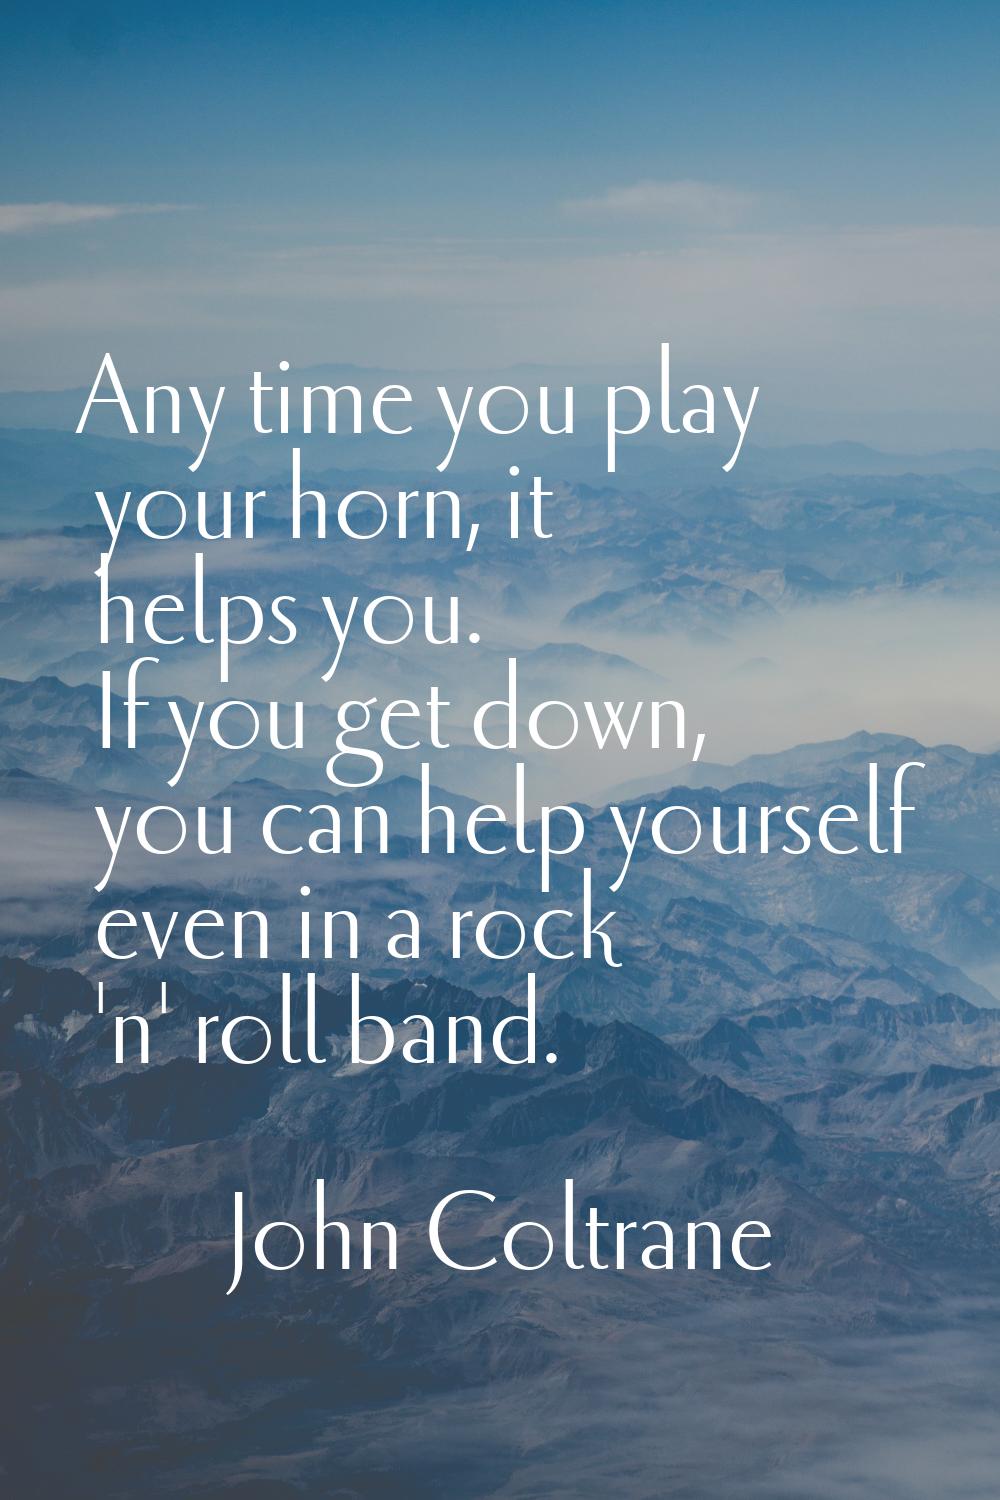 Any time you play your horn, it helps you. If you get down, you can help yourself even in a rock 'n